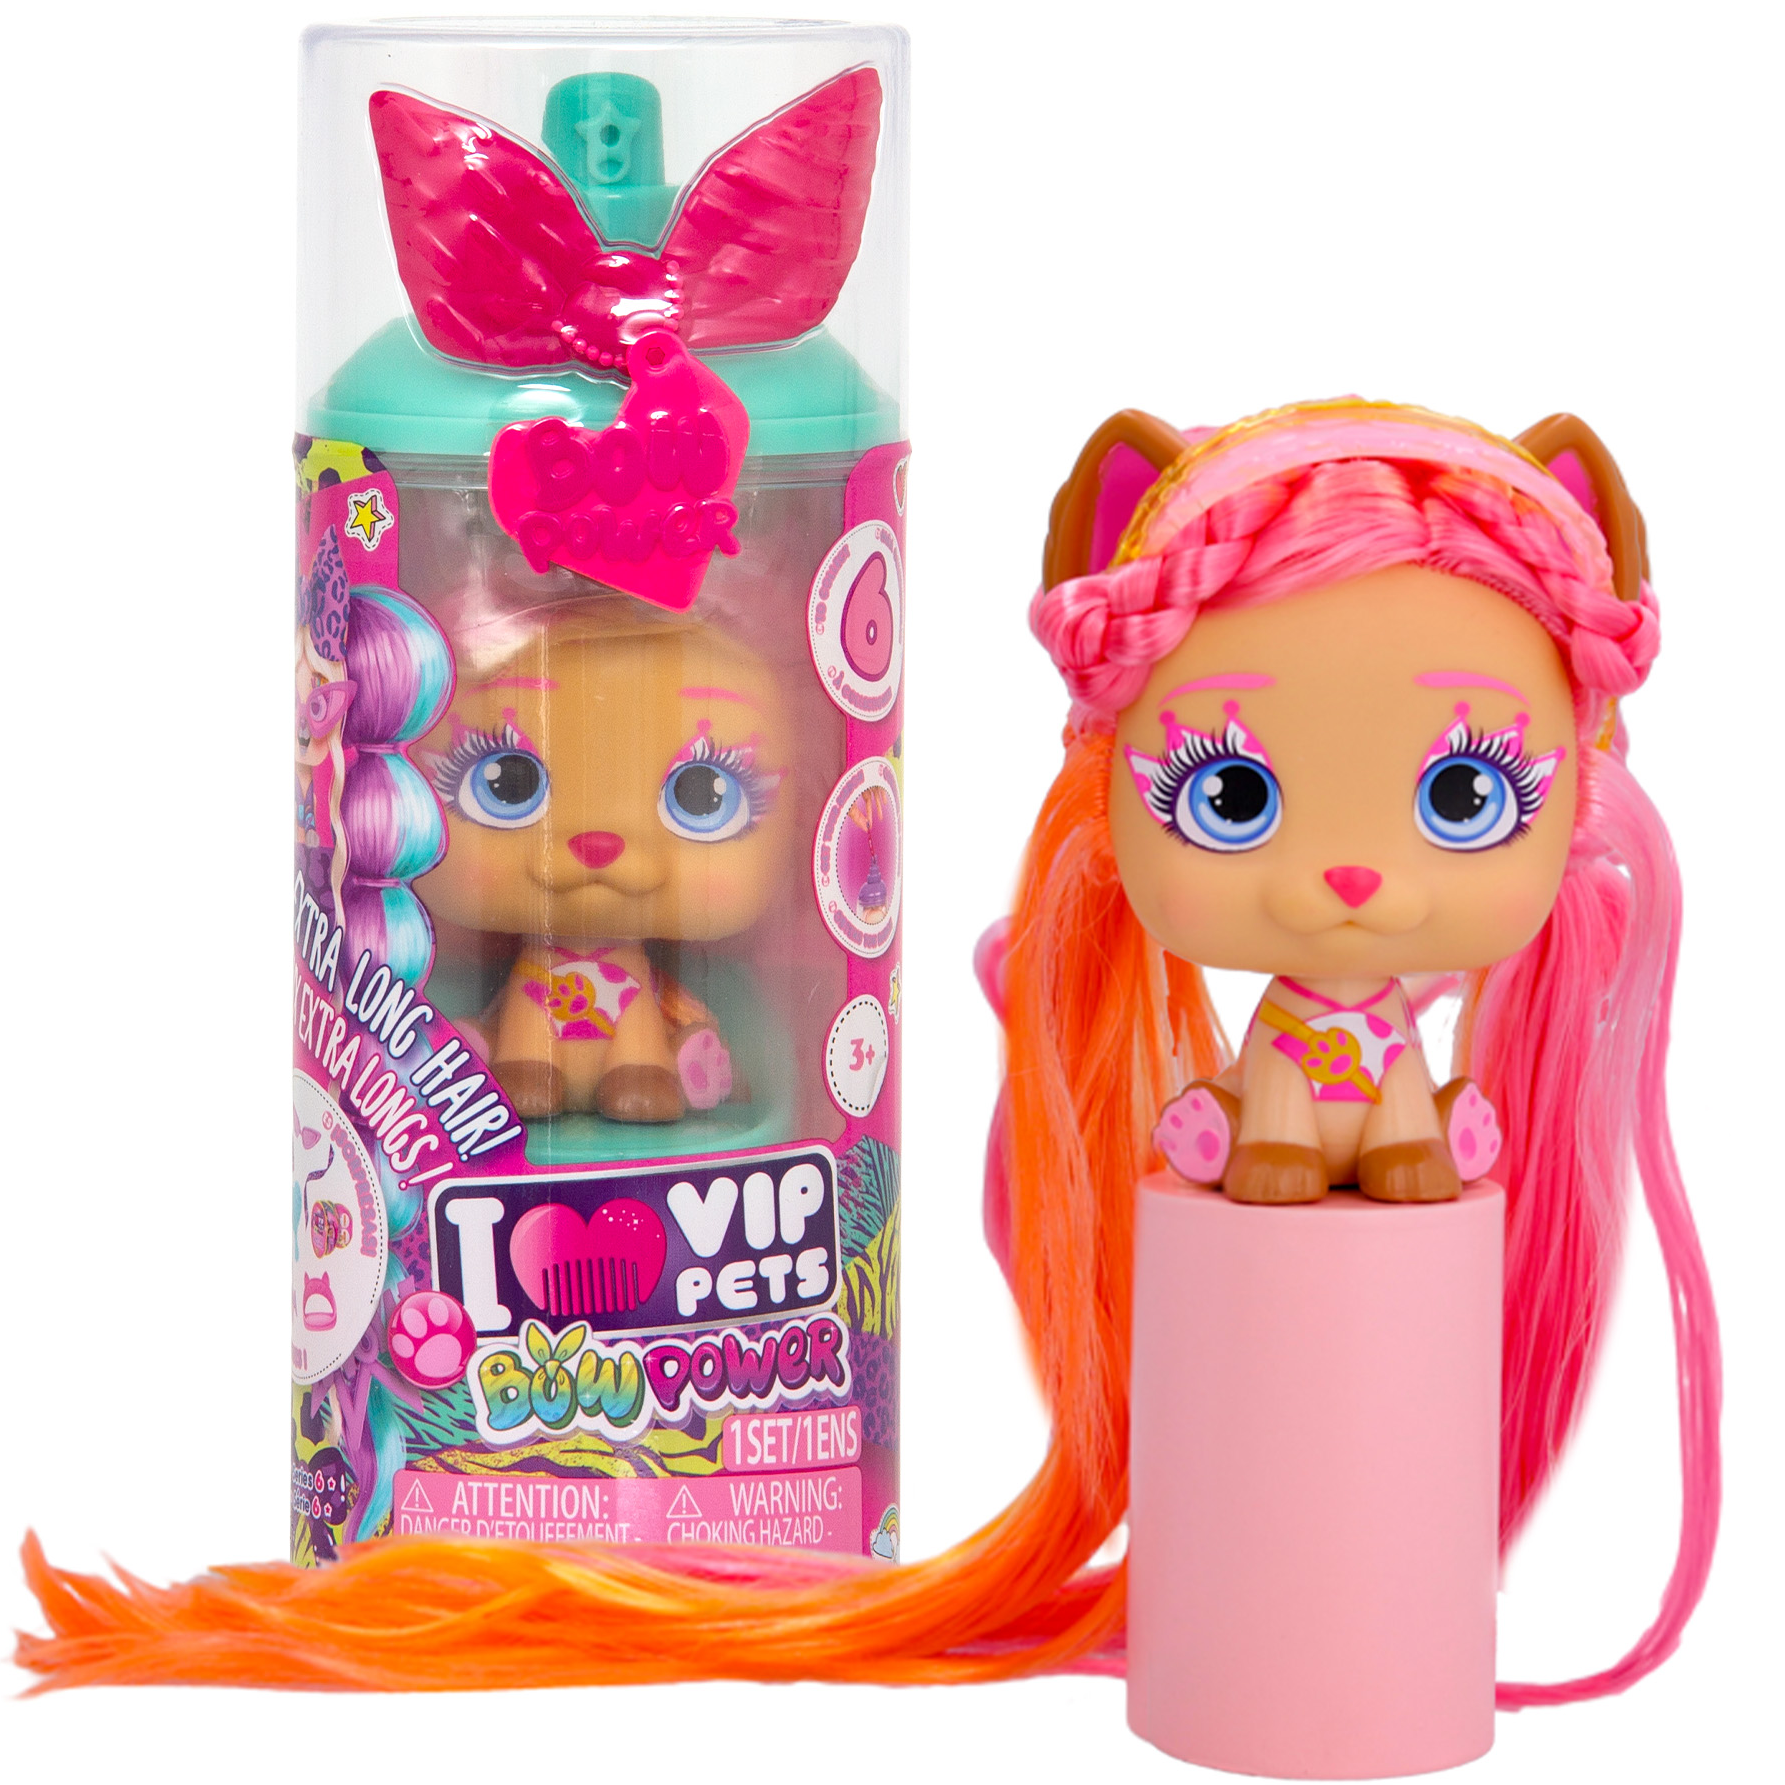 VIP Pets Bow Power Shiara, 1 VIP Pets Doll, and 8+ Accessories for Hair  Styling, Ages 4-6 Years